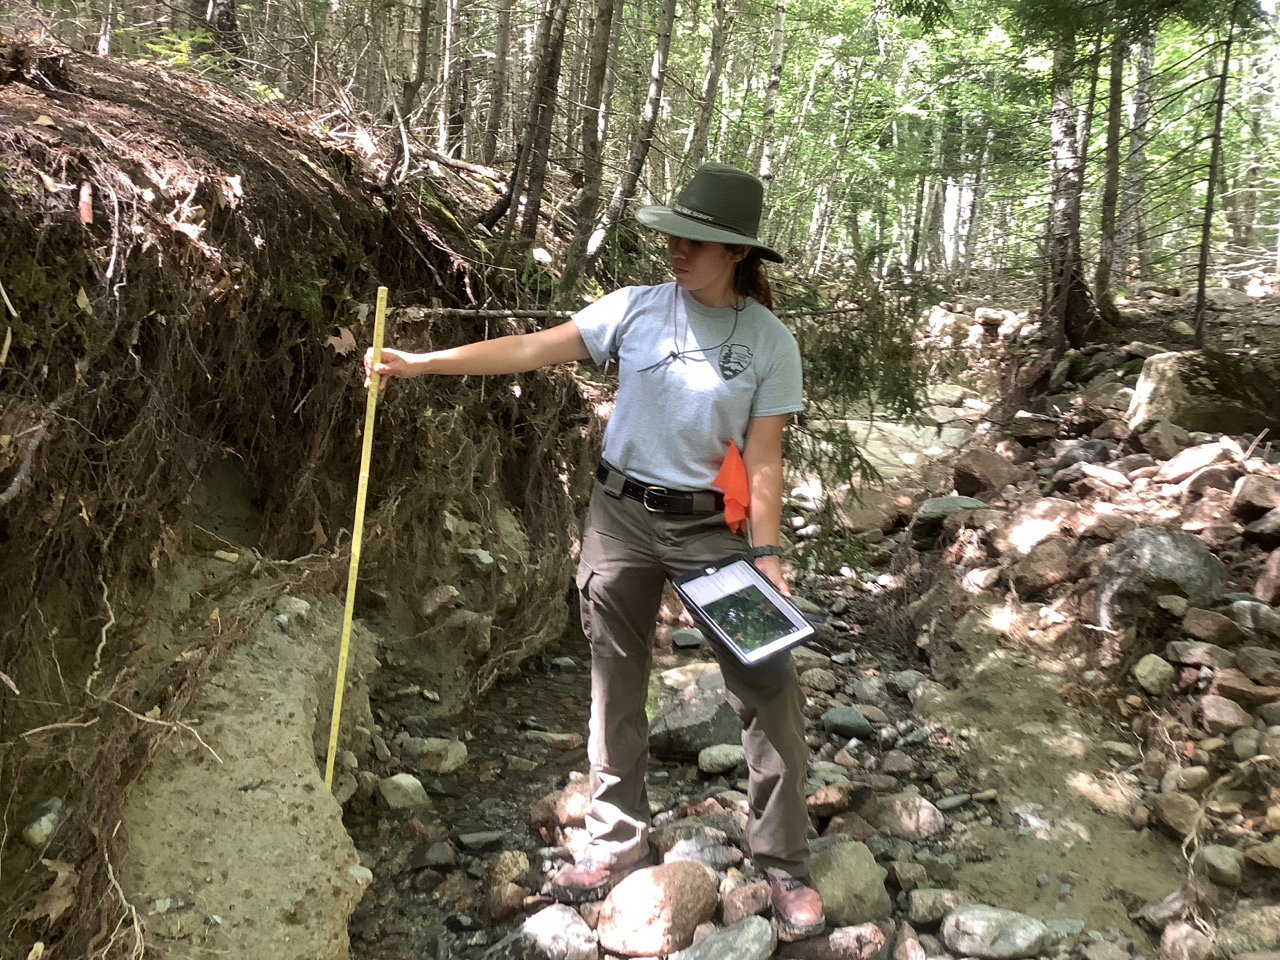 Acadia’s Physical Science Technician Erica Doody measures the depth of scour that occurred to a section of Chasm Brook.